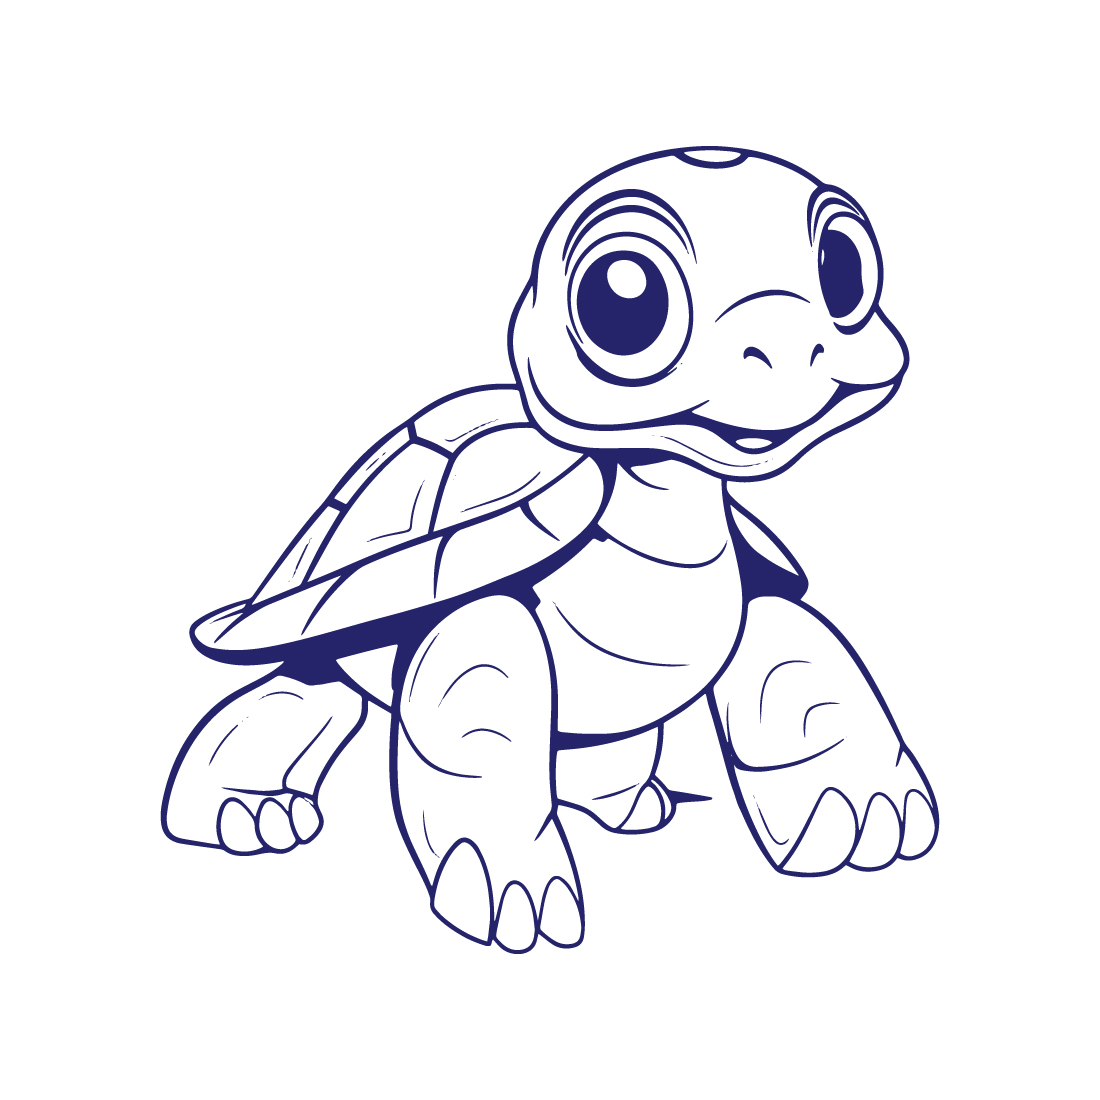 Cute Turtle illustration preview image.